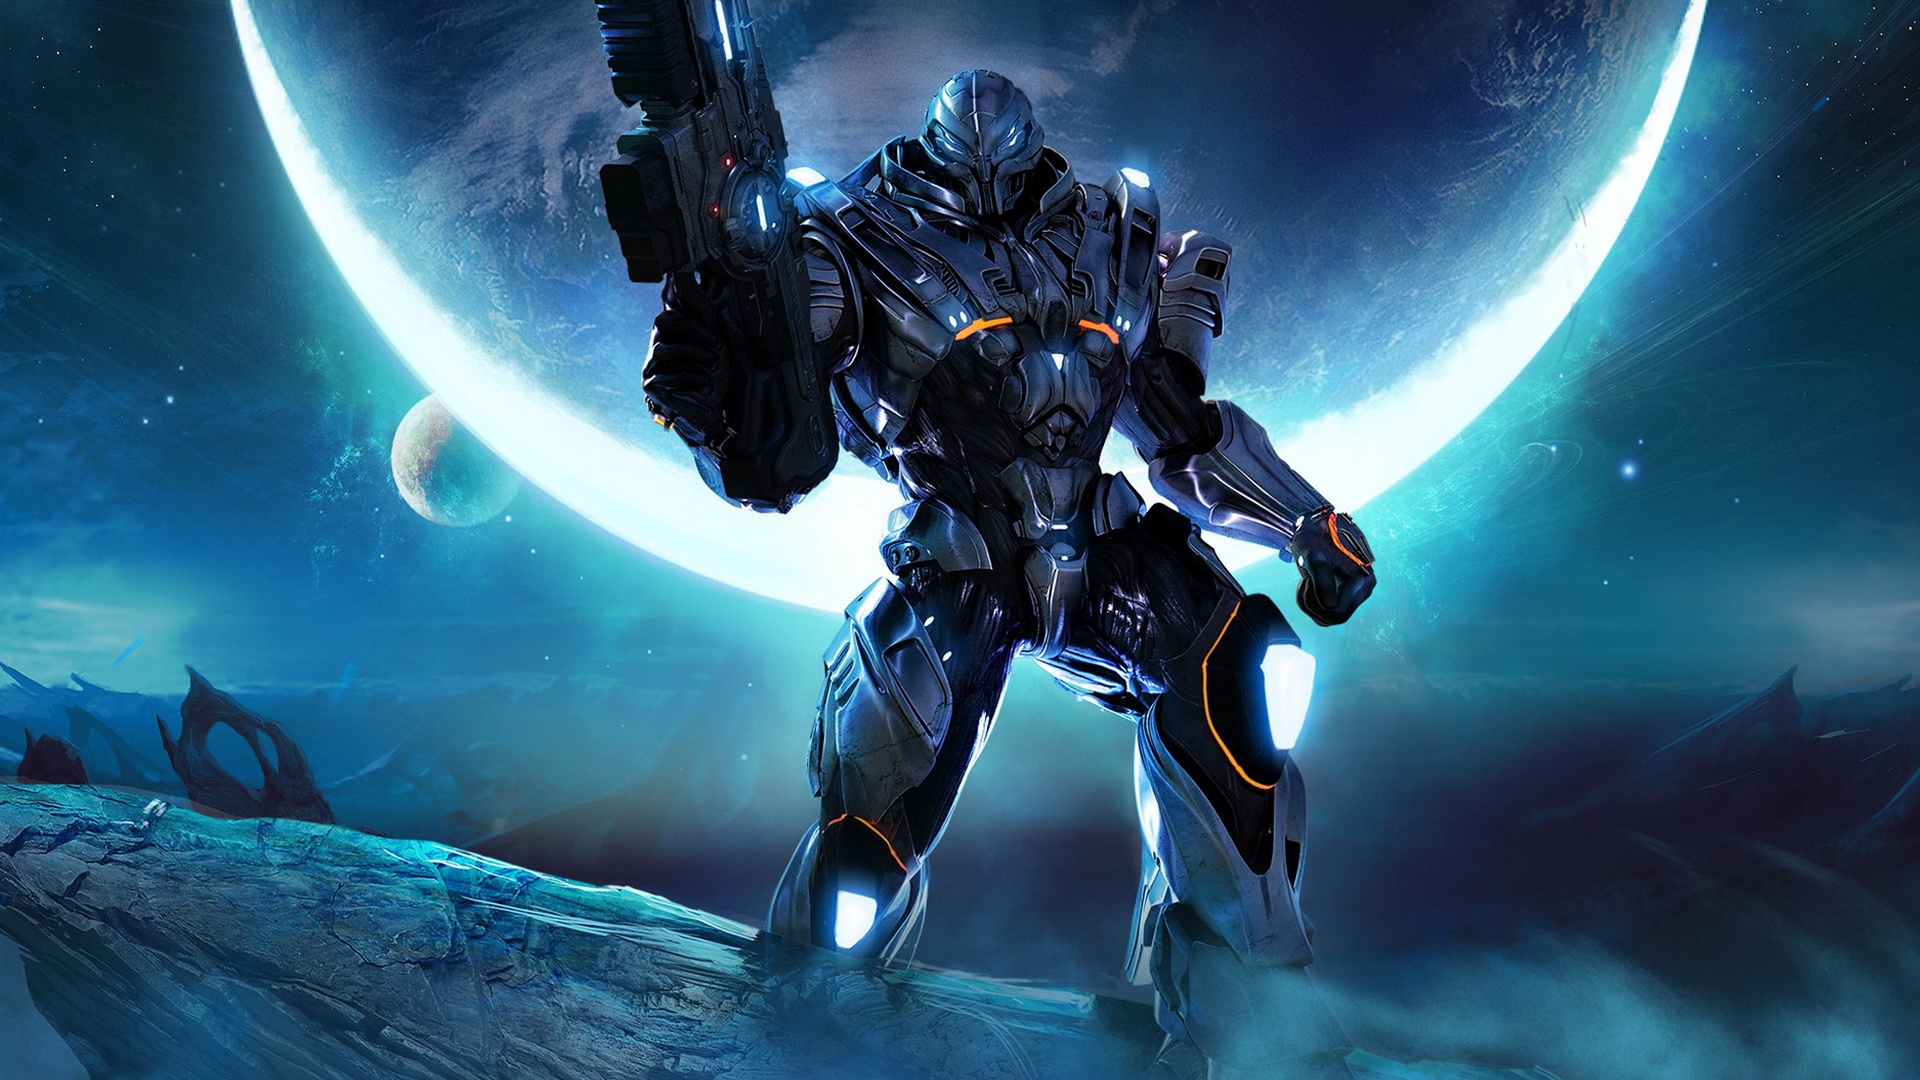 Halo Reach Wallpapers 1080p